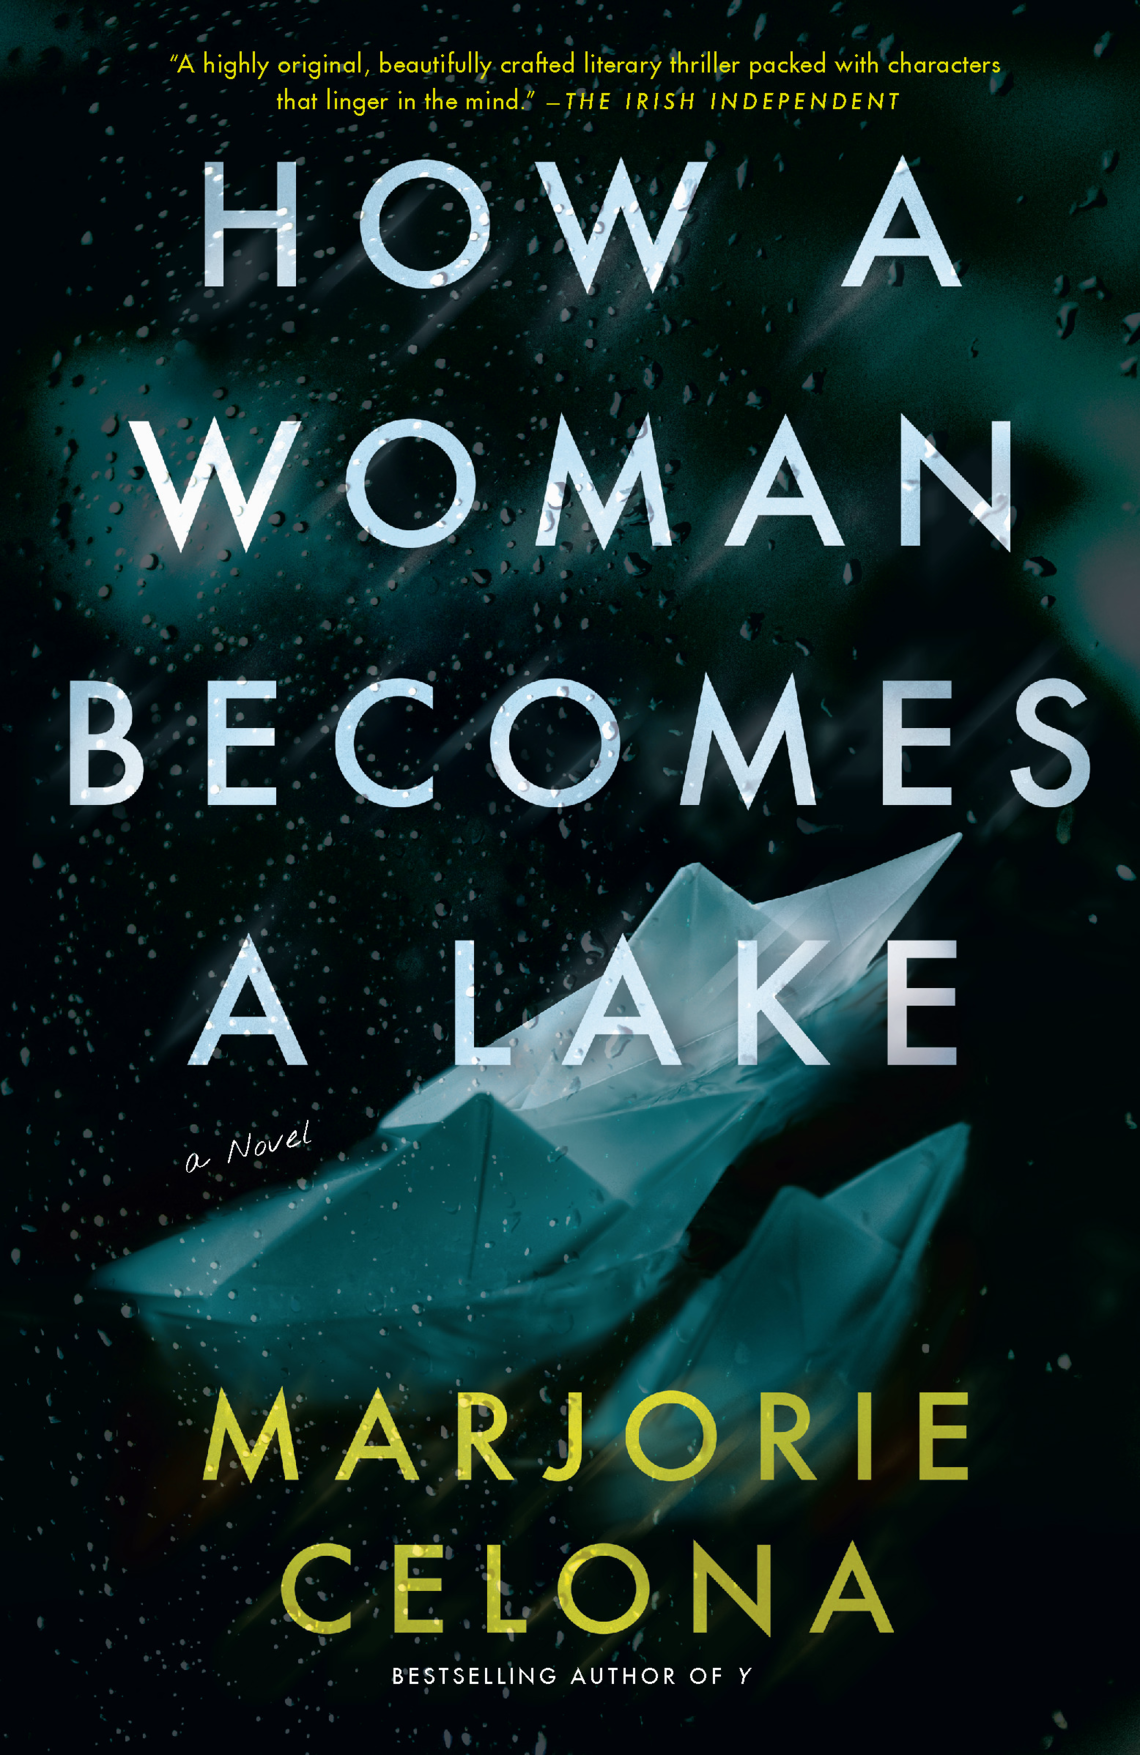 Cover art of Marjorie Celona's 2020 novel, How a Woman Becomes a Lake.